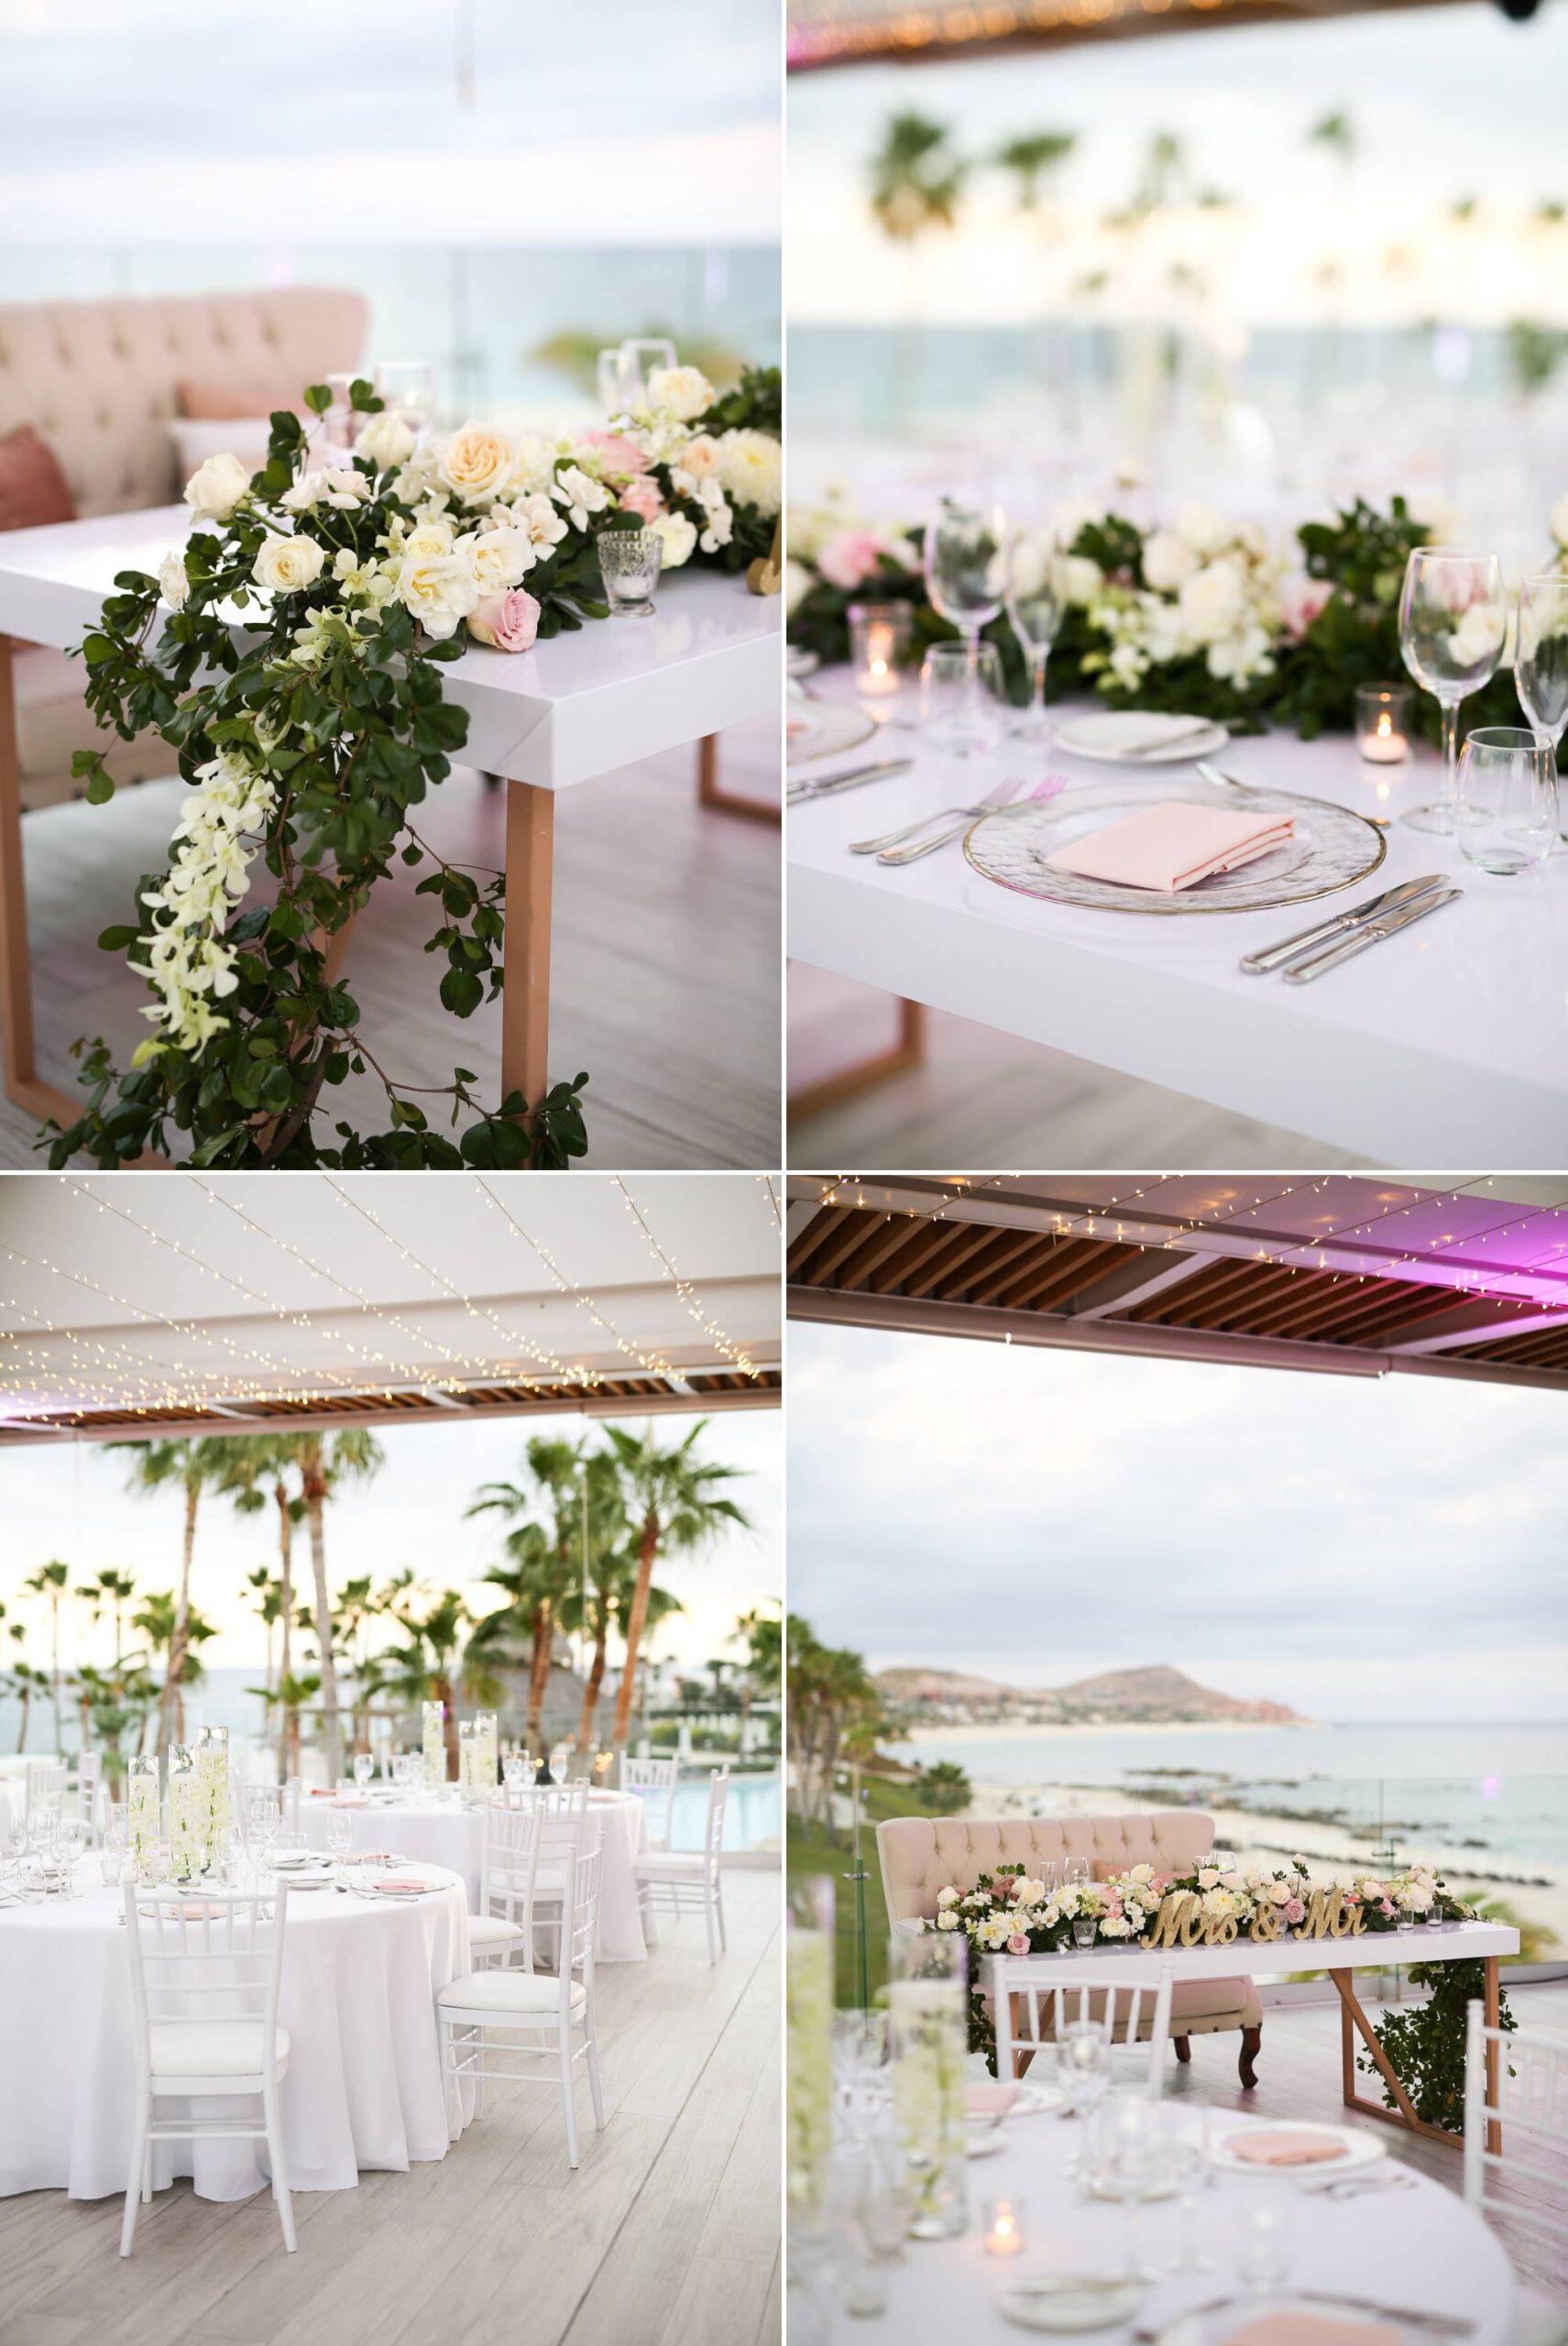 Reception decorations, Table decor with flowers and greenery, twinkle lights on ceiling, head sweetheart table and view of the ocean behind